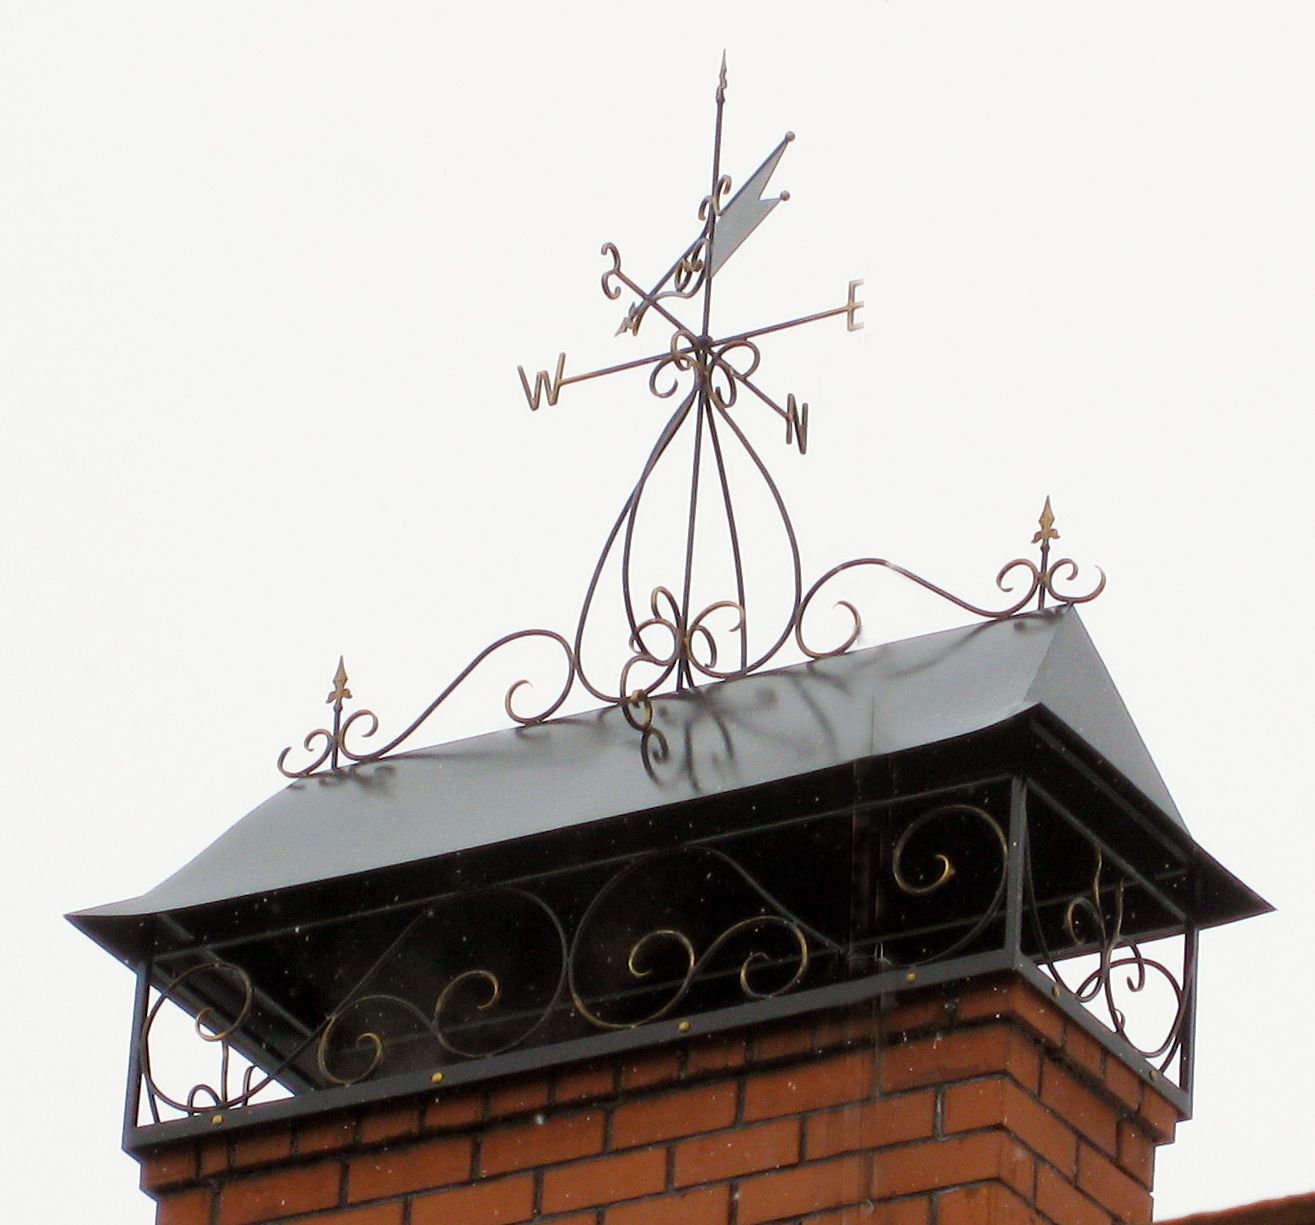 Weather vane mounted on chimney pipe